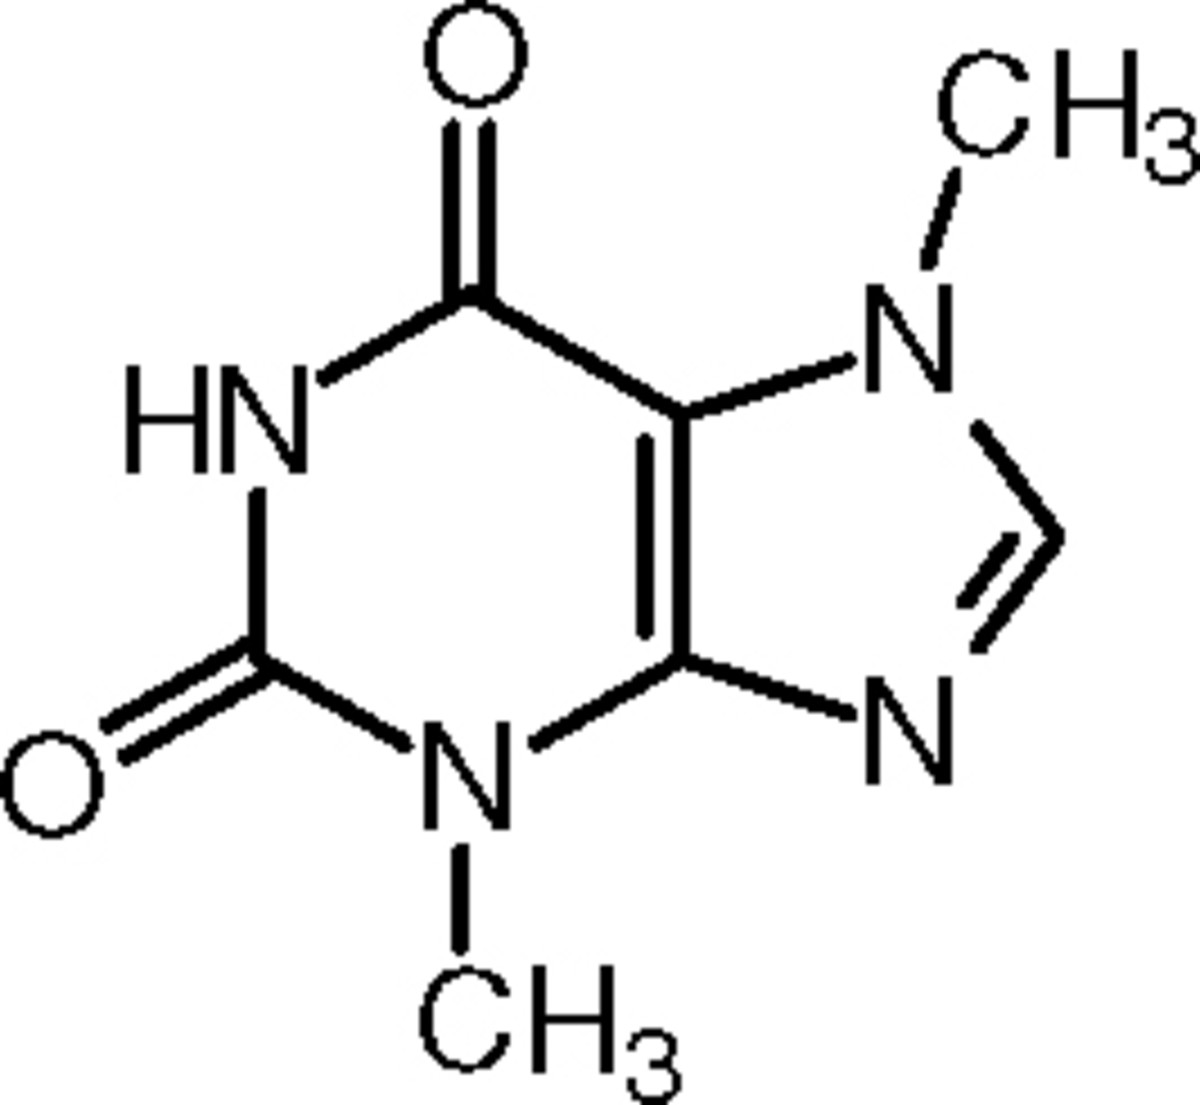 Molecular structure of theobromine.